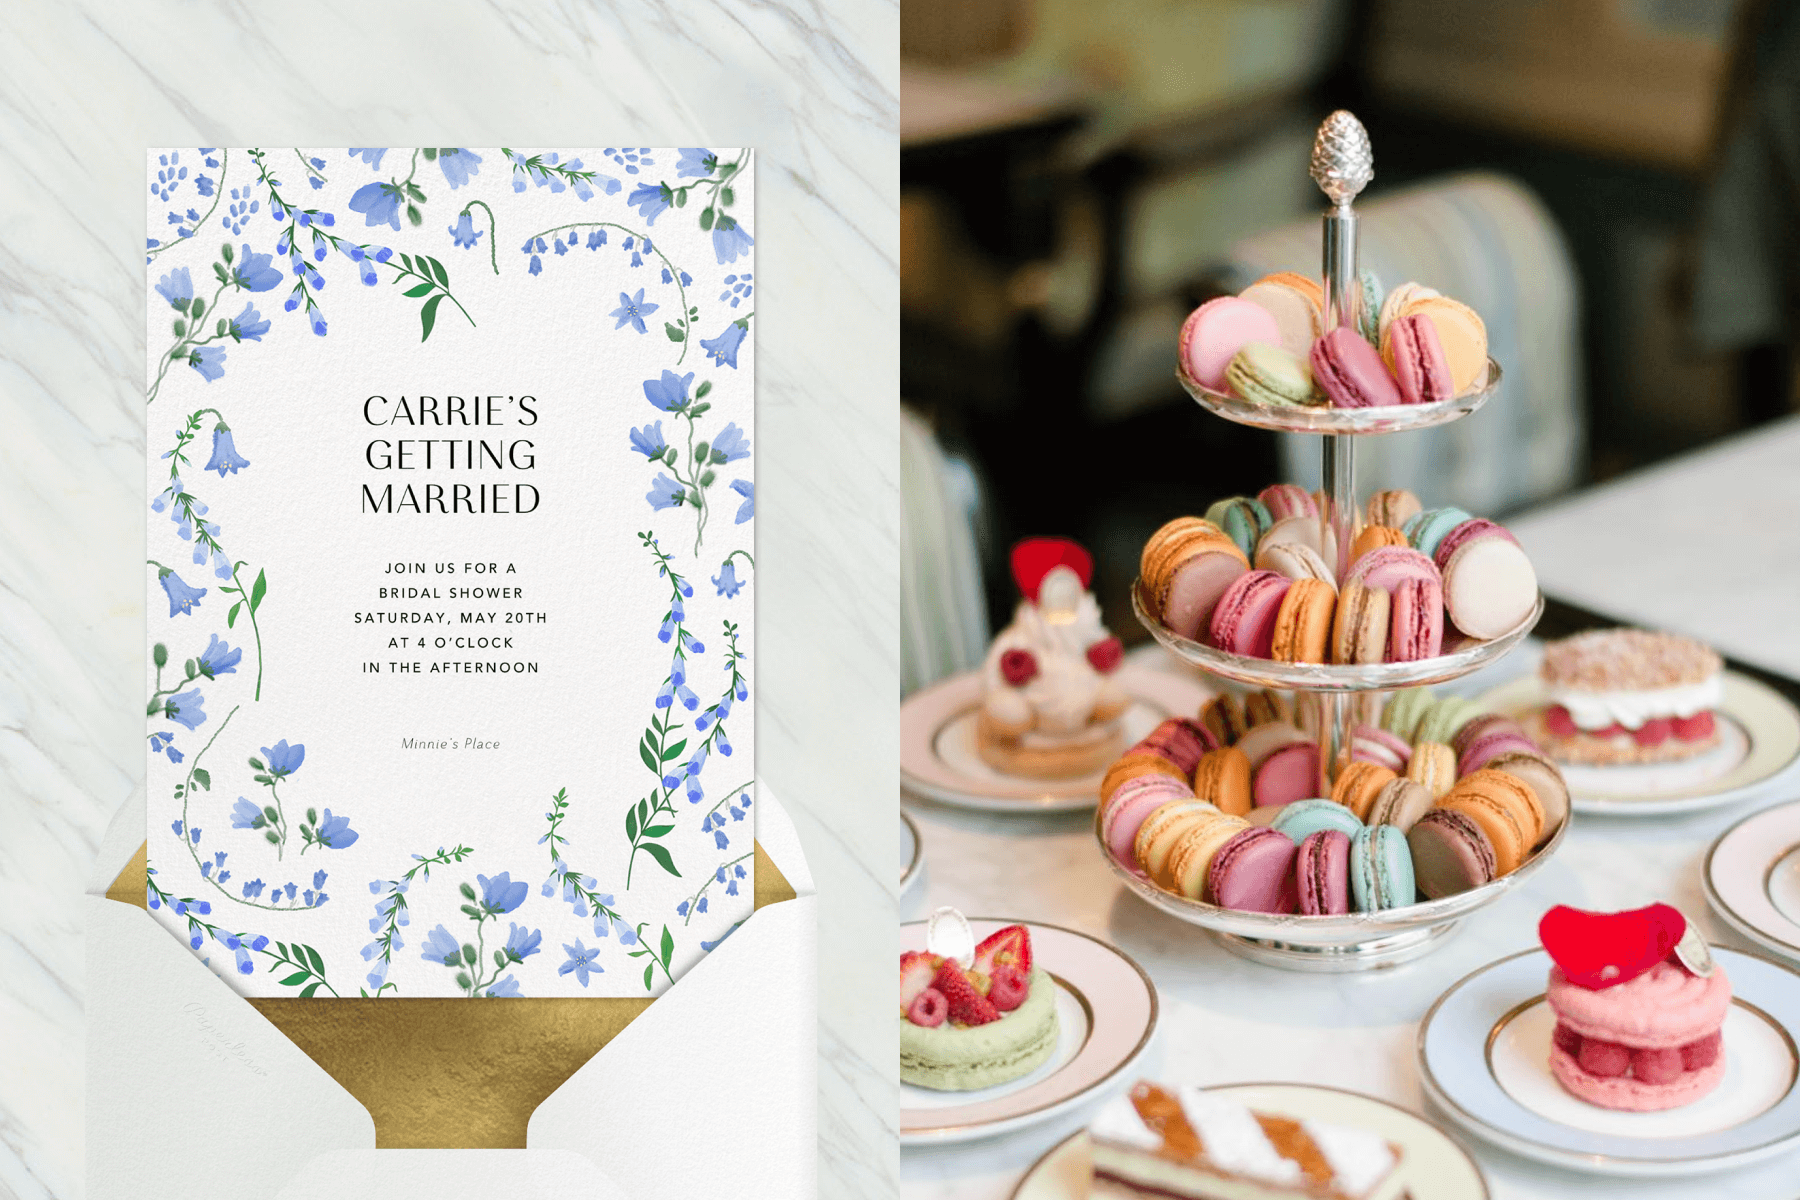 left: A white bridal shower invitation with blue flowers around the border. Right: A dessert tower filled with rainbow macarons.